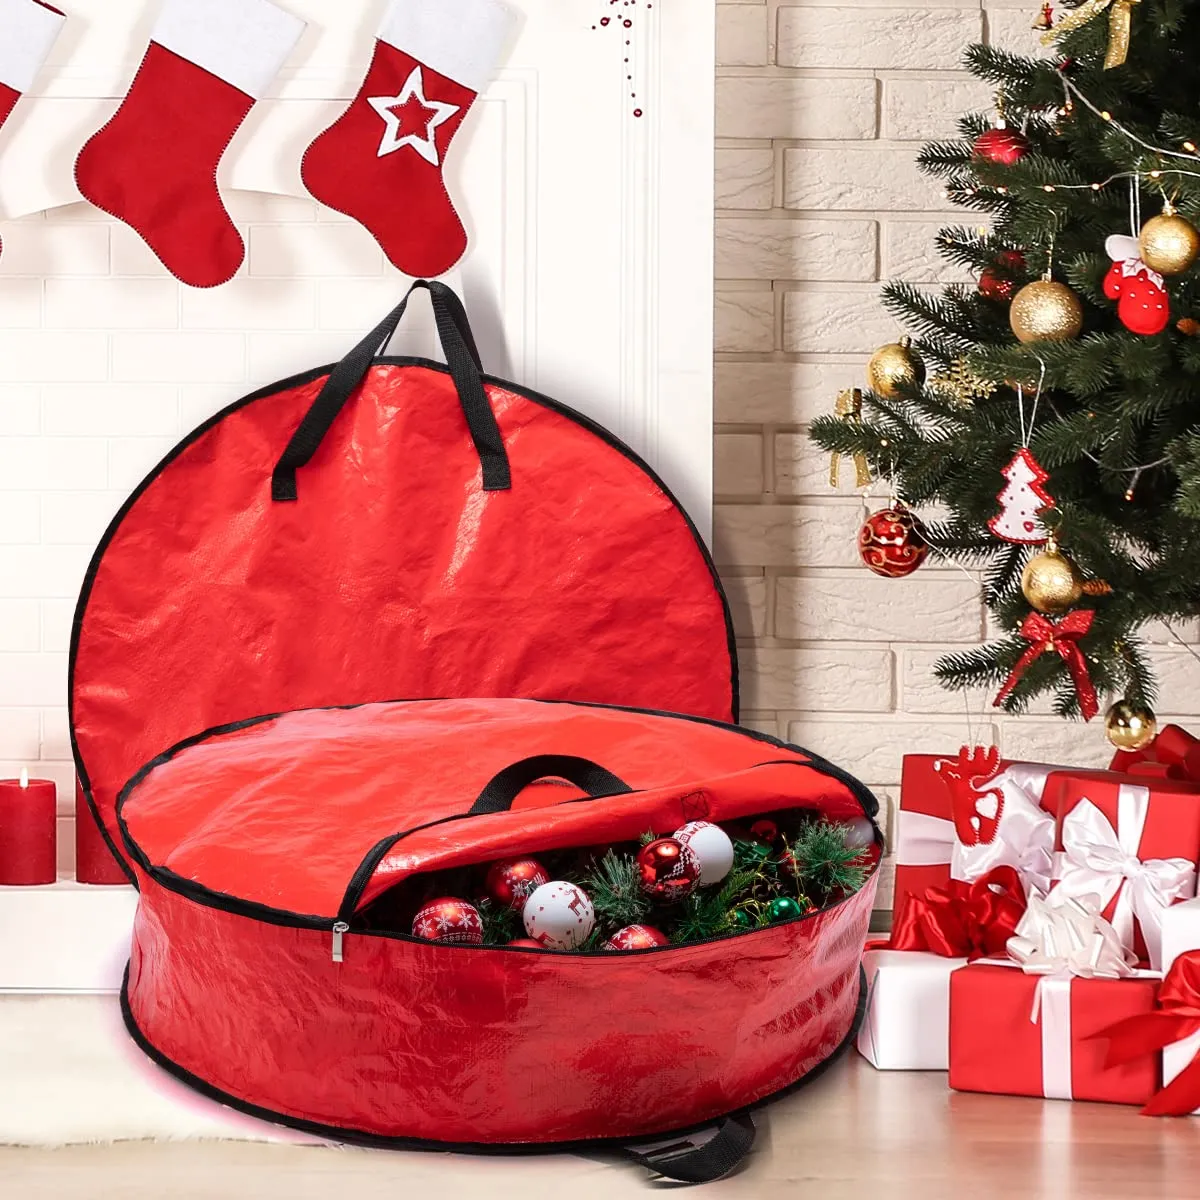 Red Christmas Ornament Storage Box with Adjustable Dividers